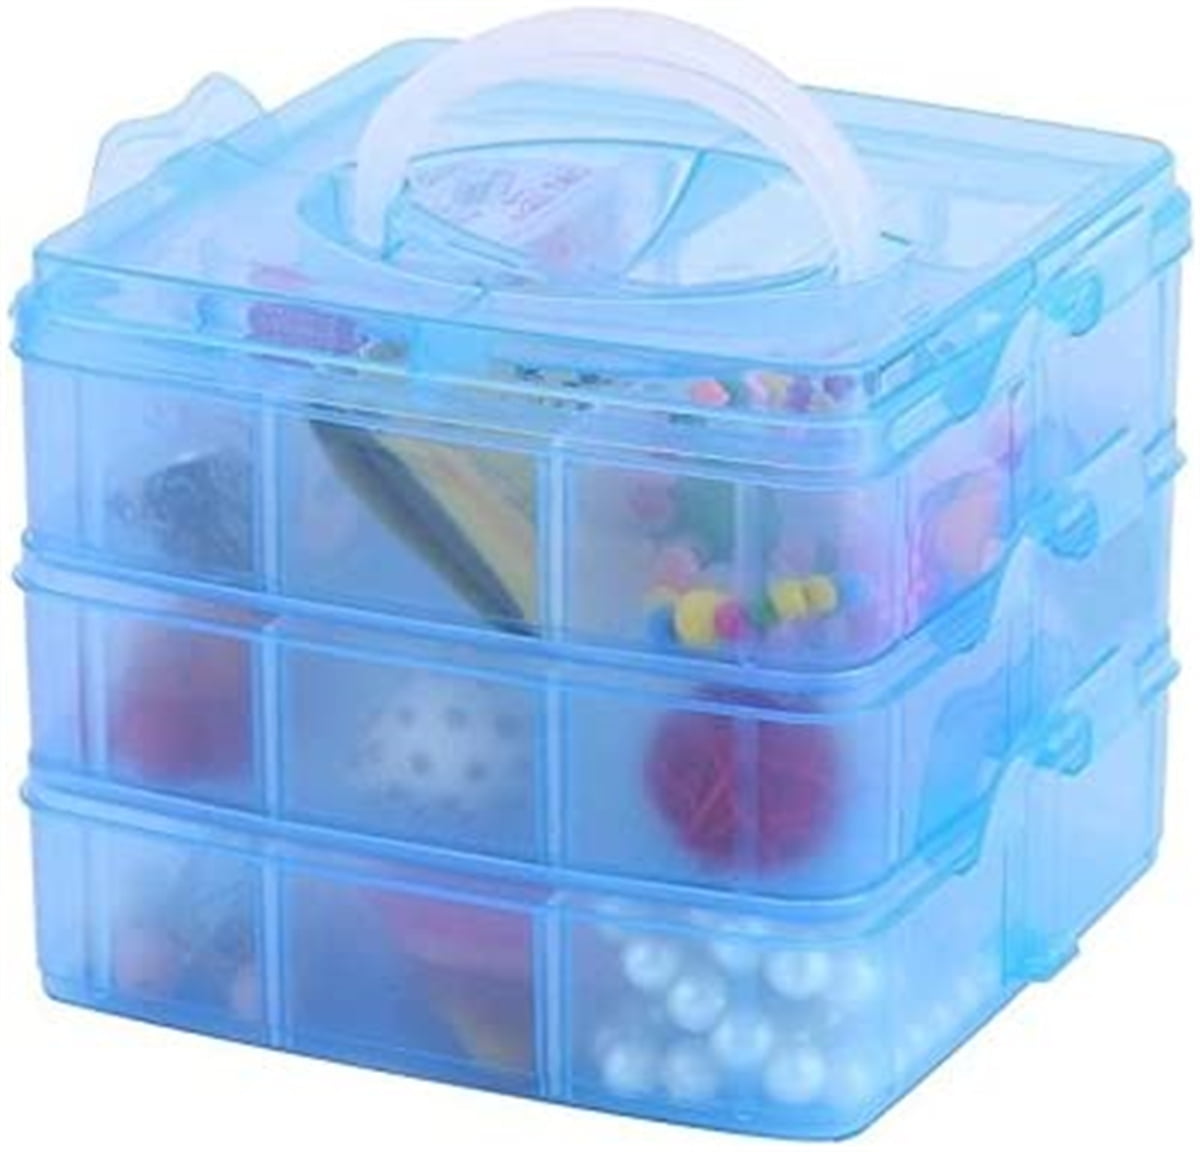 Clear Storage Container 3.54x2.68x2.56 inch, 1 Pack Plastic Rectangular Box  for Beads Art Craft 